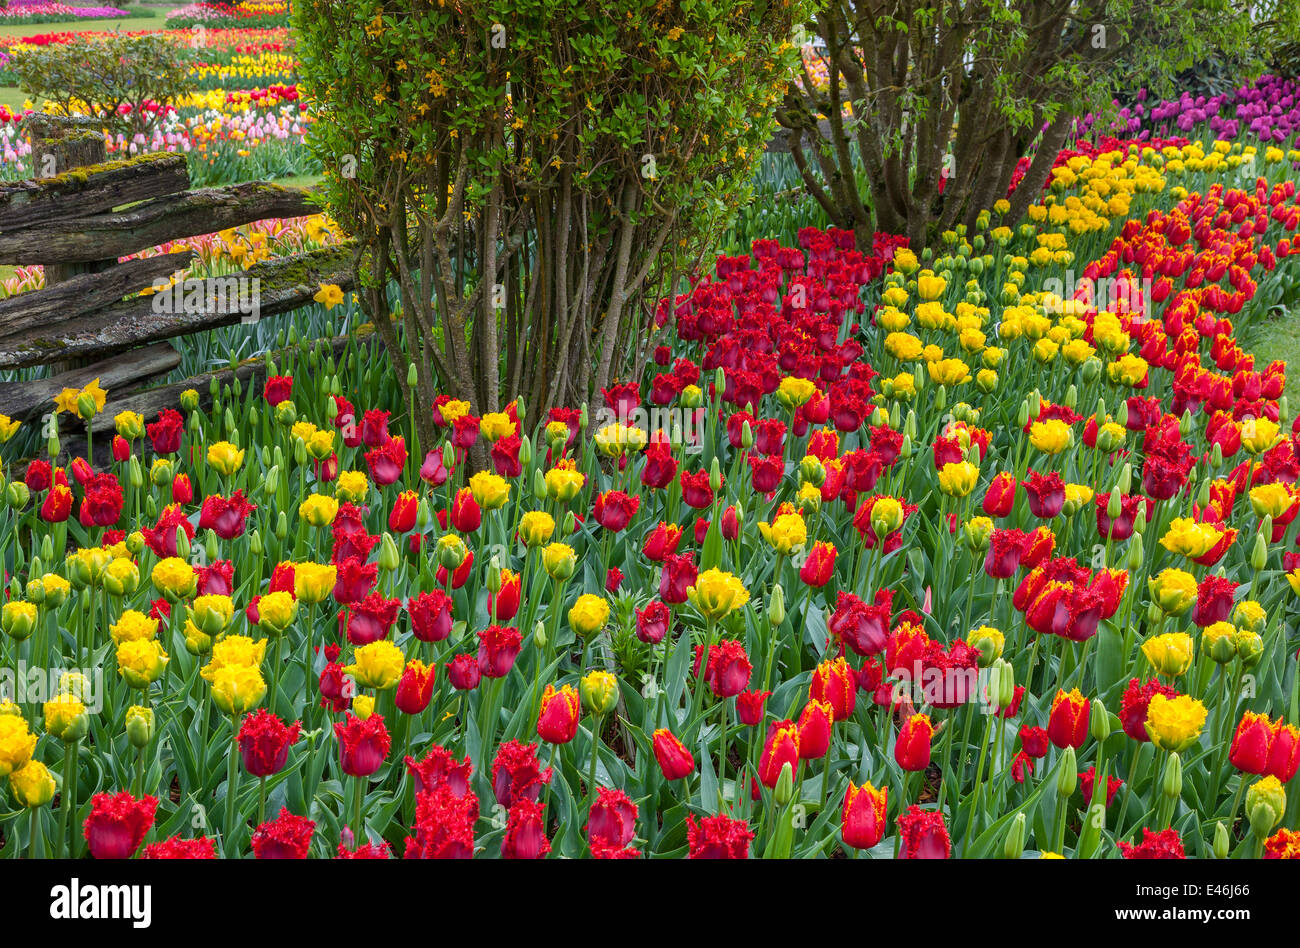 Skagit County, WA: Assorted varieties of flowering tulips and grape hyacinths form colorful patterns in the RoozenGaarde garden. Stock Photo